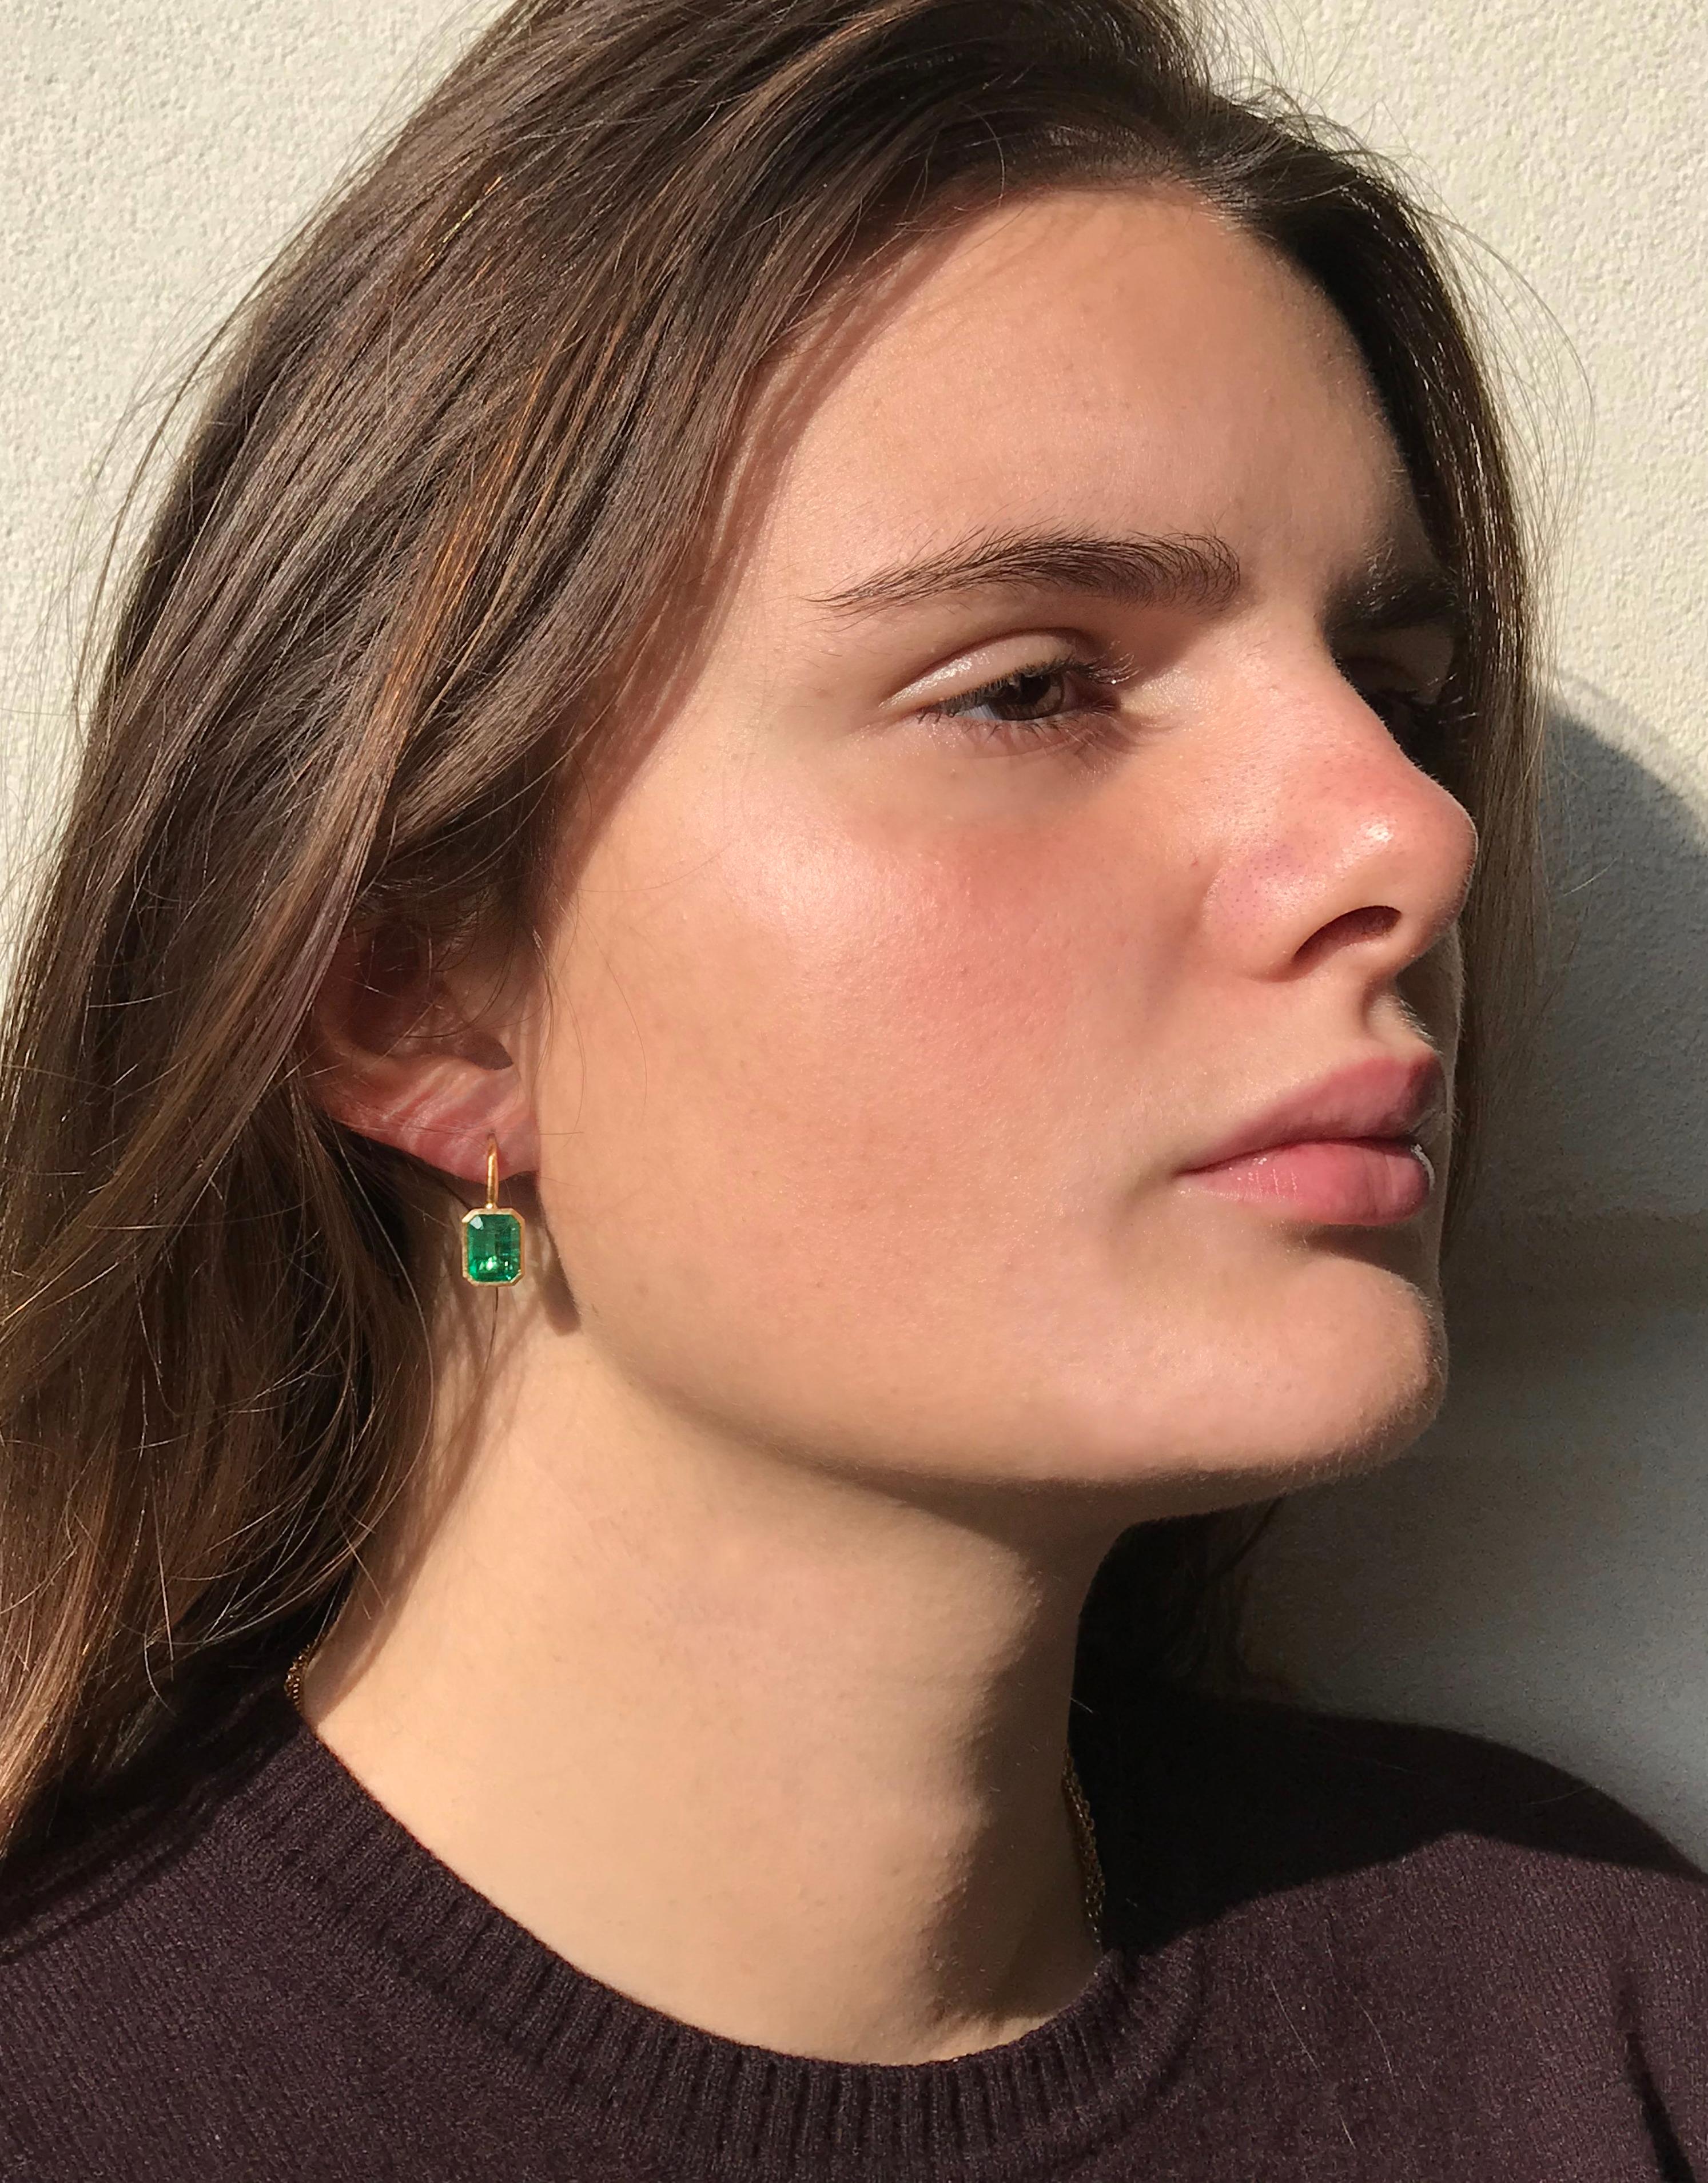 Dalben design  18k yellow gold matte finishing earrings with two bezel-set emerald faceted cut emerald weight 4,66 carats . 
Bezel stone dimensions :
9,9x8,1 - 10,5x8 mm
height with leverback 19,5 mm
The earrings has been designed and handcrafted in